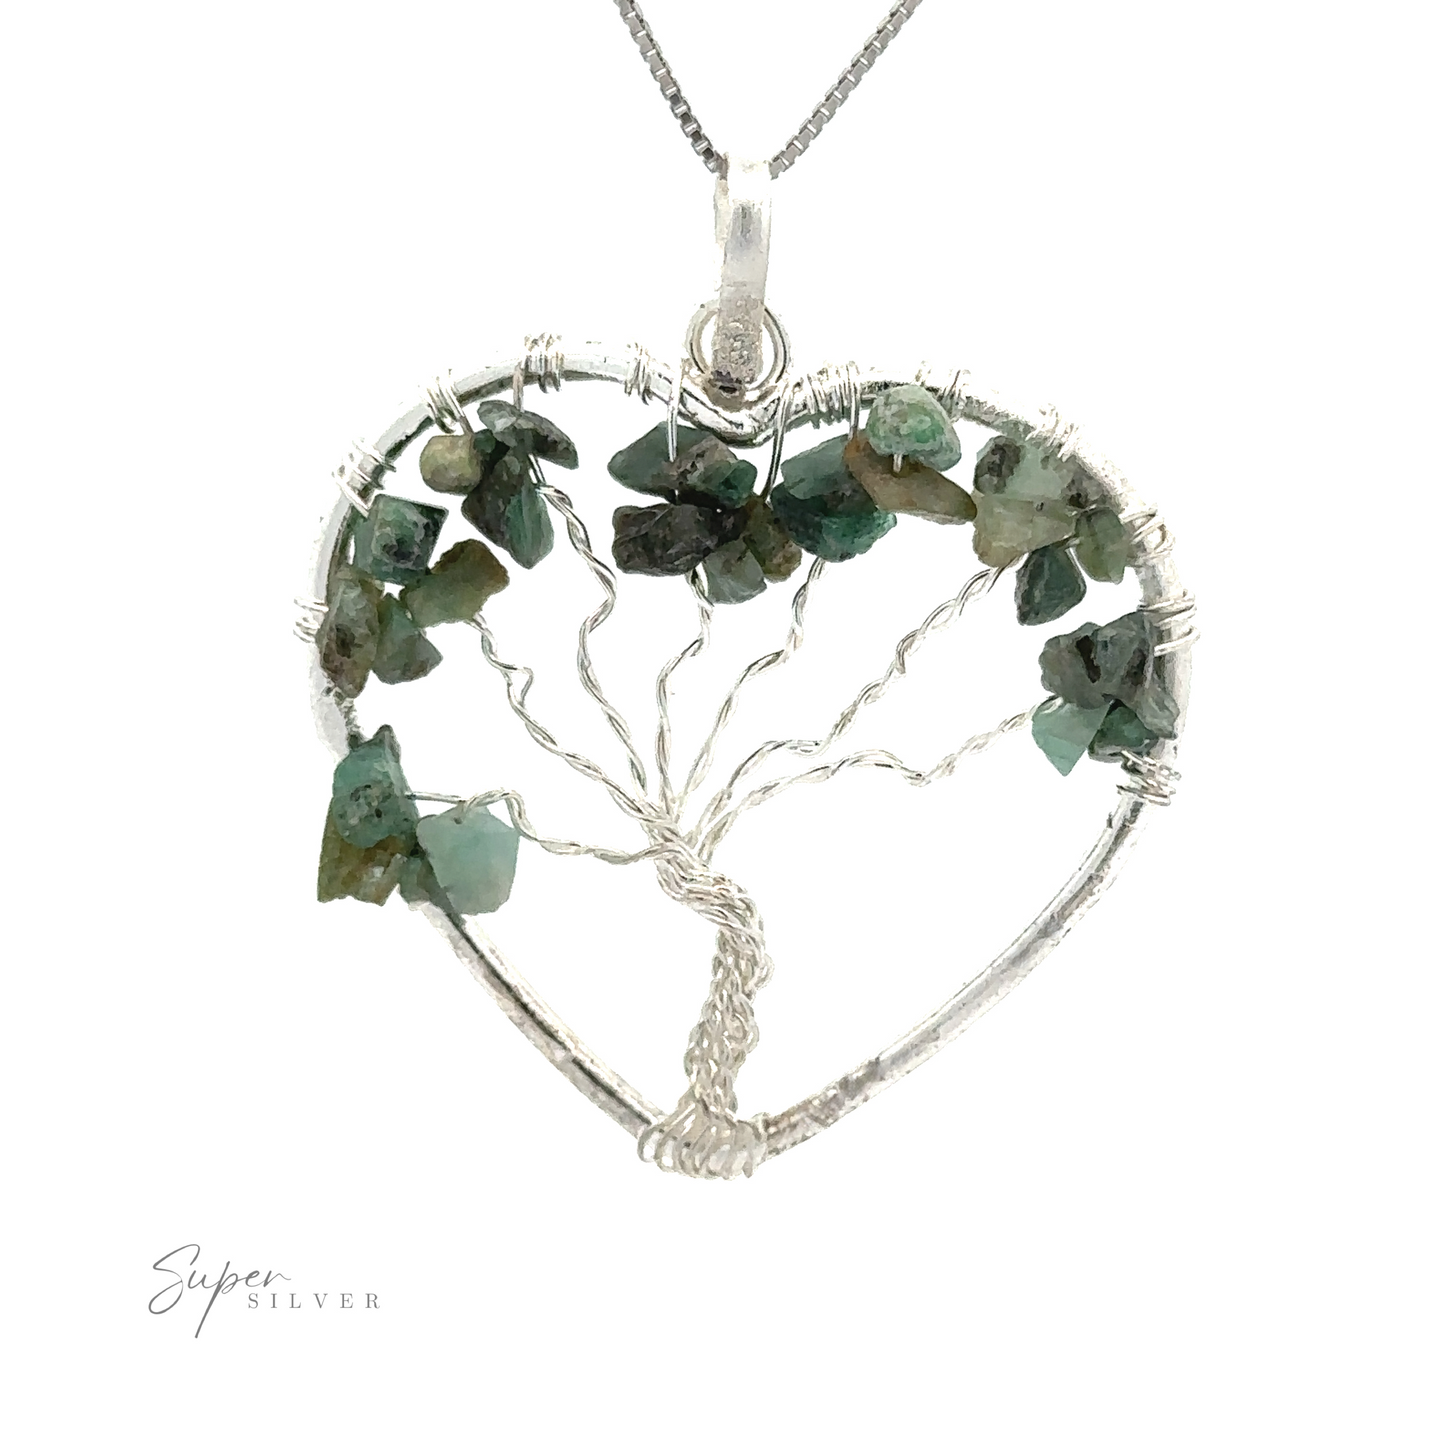 
                  
                    A Heart Shaped Tree of Life Pendant featuring a heart-shaped pendant with a wire wrapped tree of life design adorned with raw stone beads. The "Super Silver" logo is visible in the corner.
                  
                